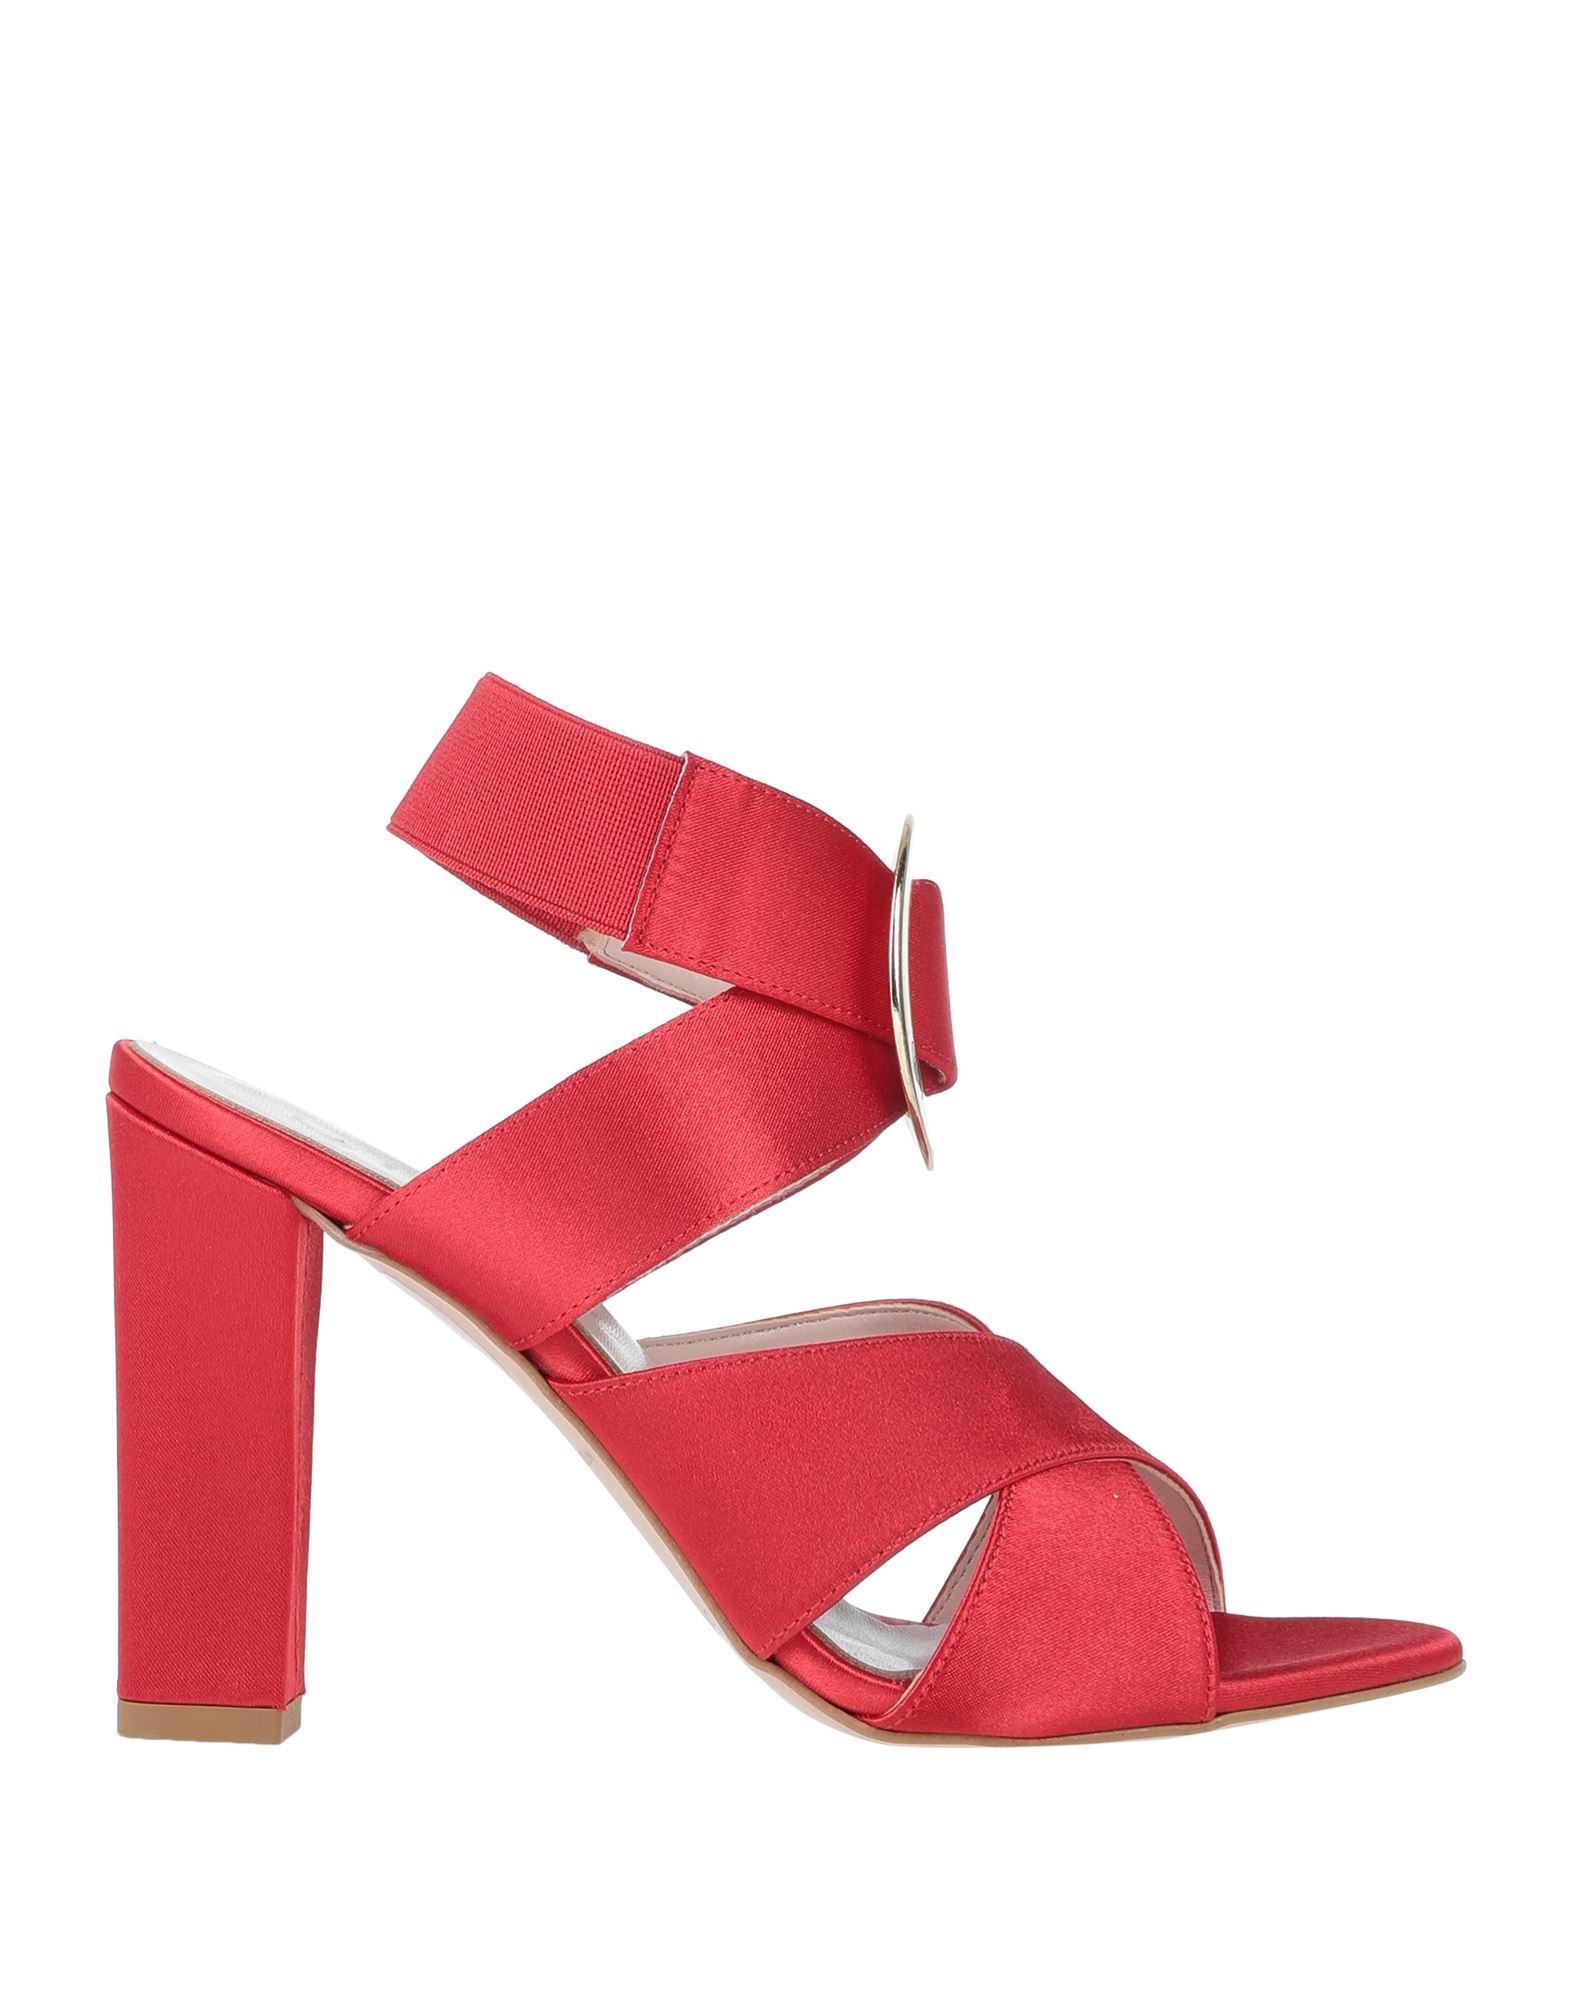 Byblos Sandals In Red